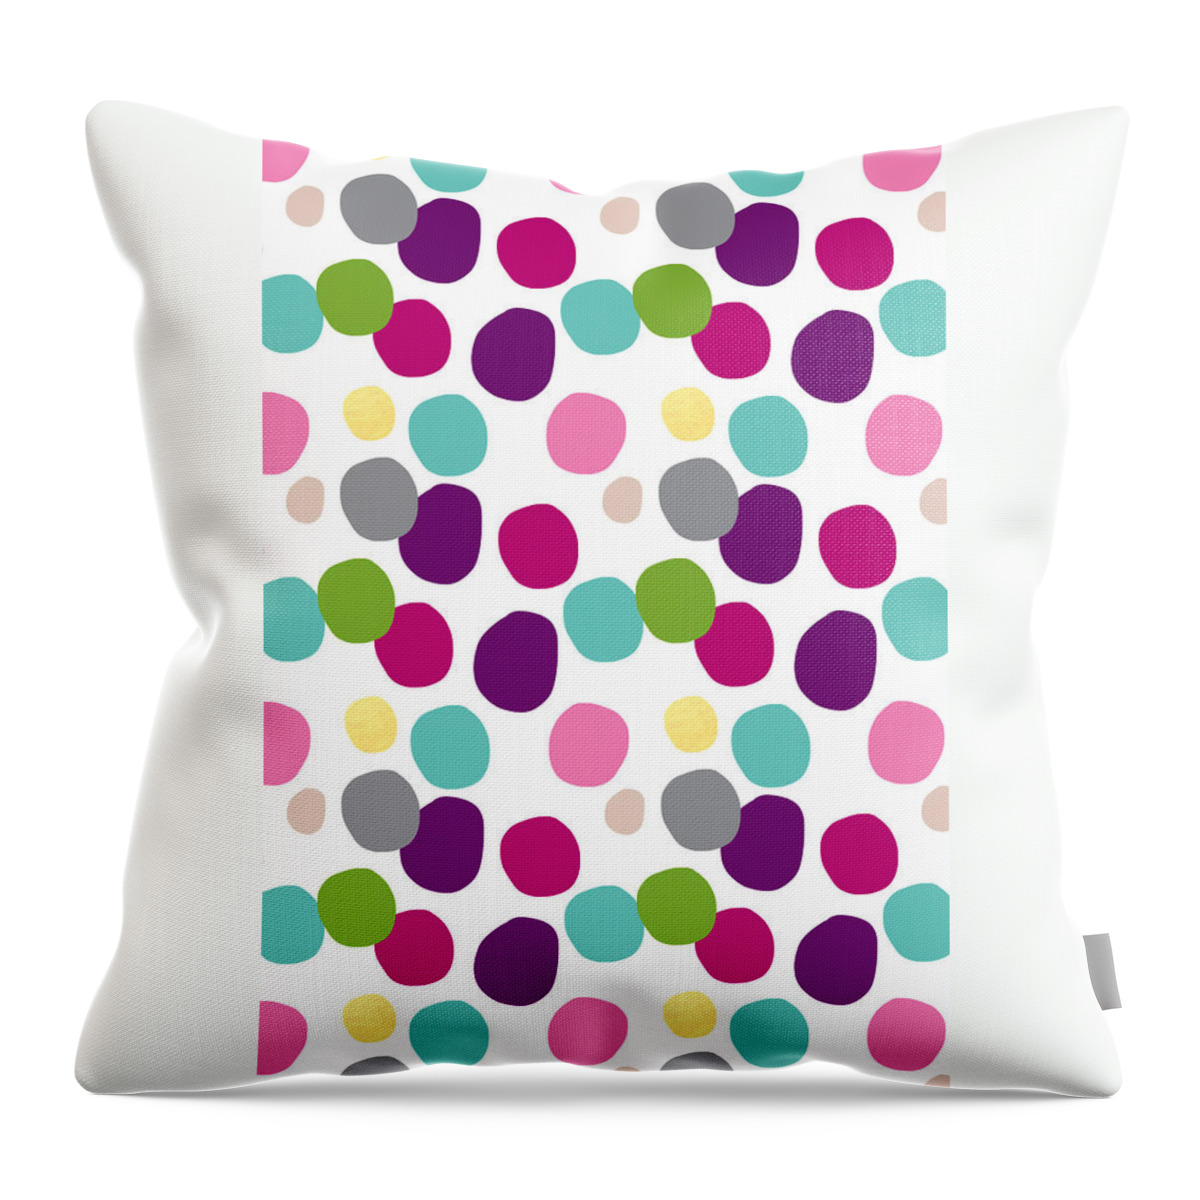 Iphone Throw Pillow featuring the painting Colorful Confetti 2 by Linda Woods